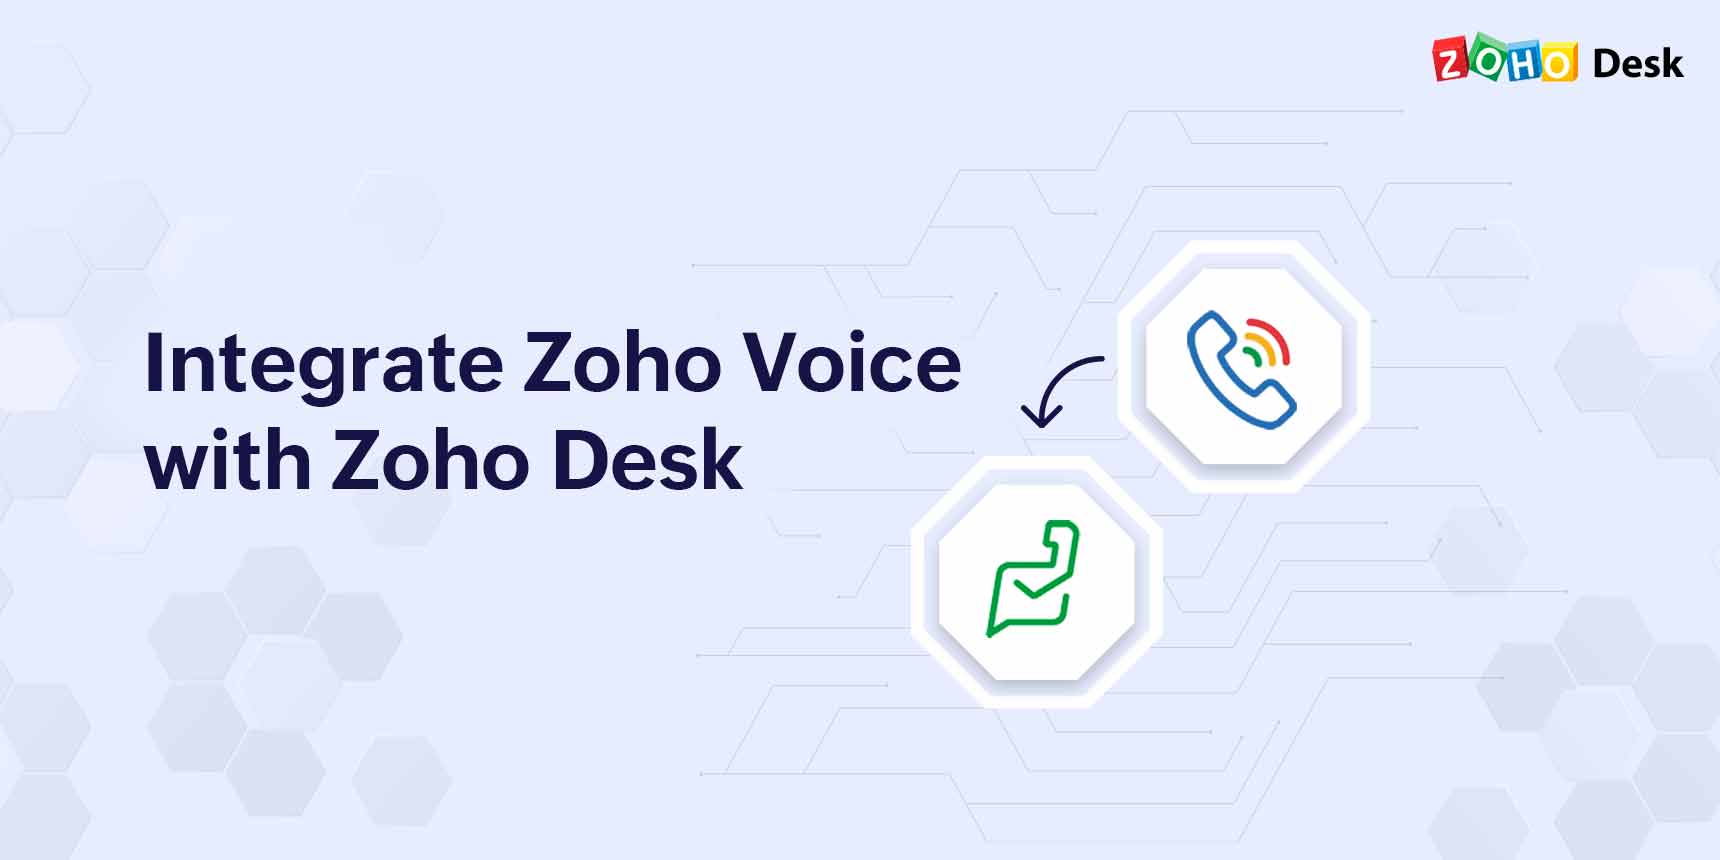 Catapult your customer support interactions to new heights with Zoho Voice